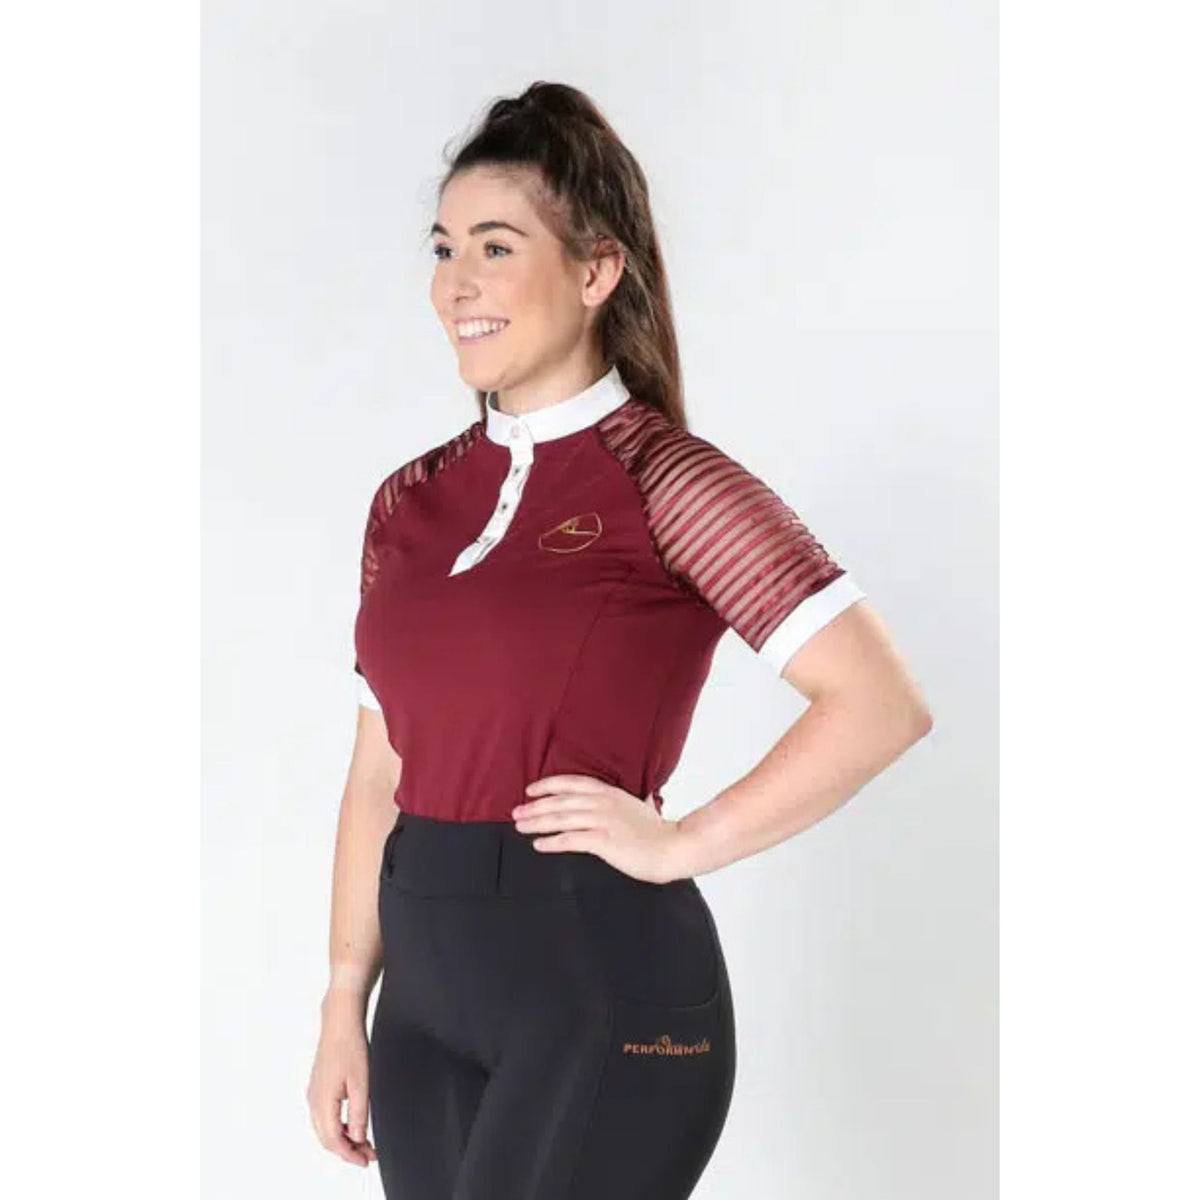 Lady wearing burgundy show shirt with lace sleeves, white cuffs and collar.